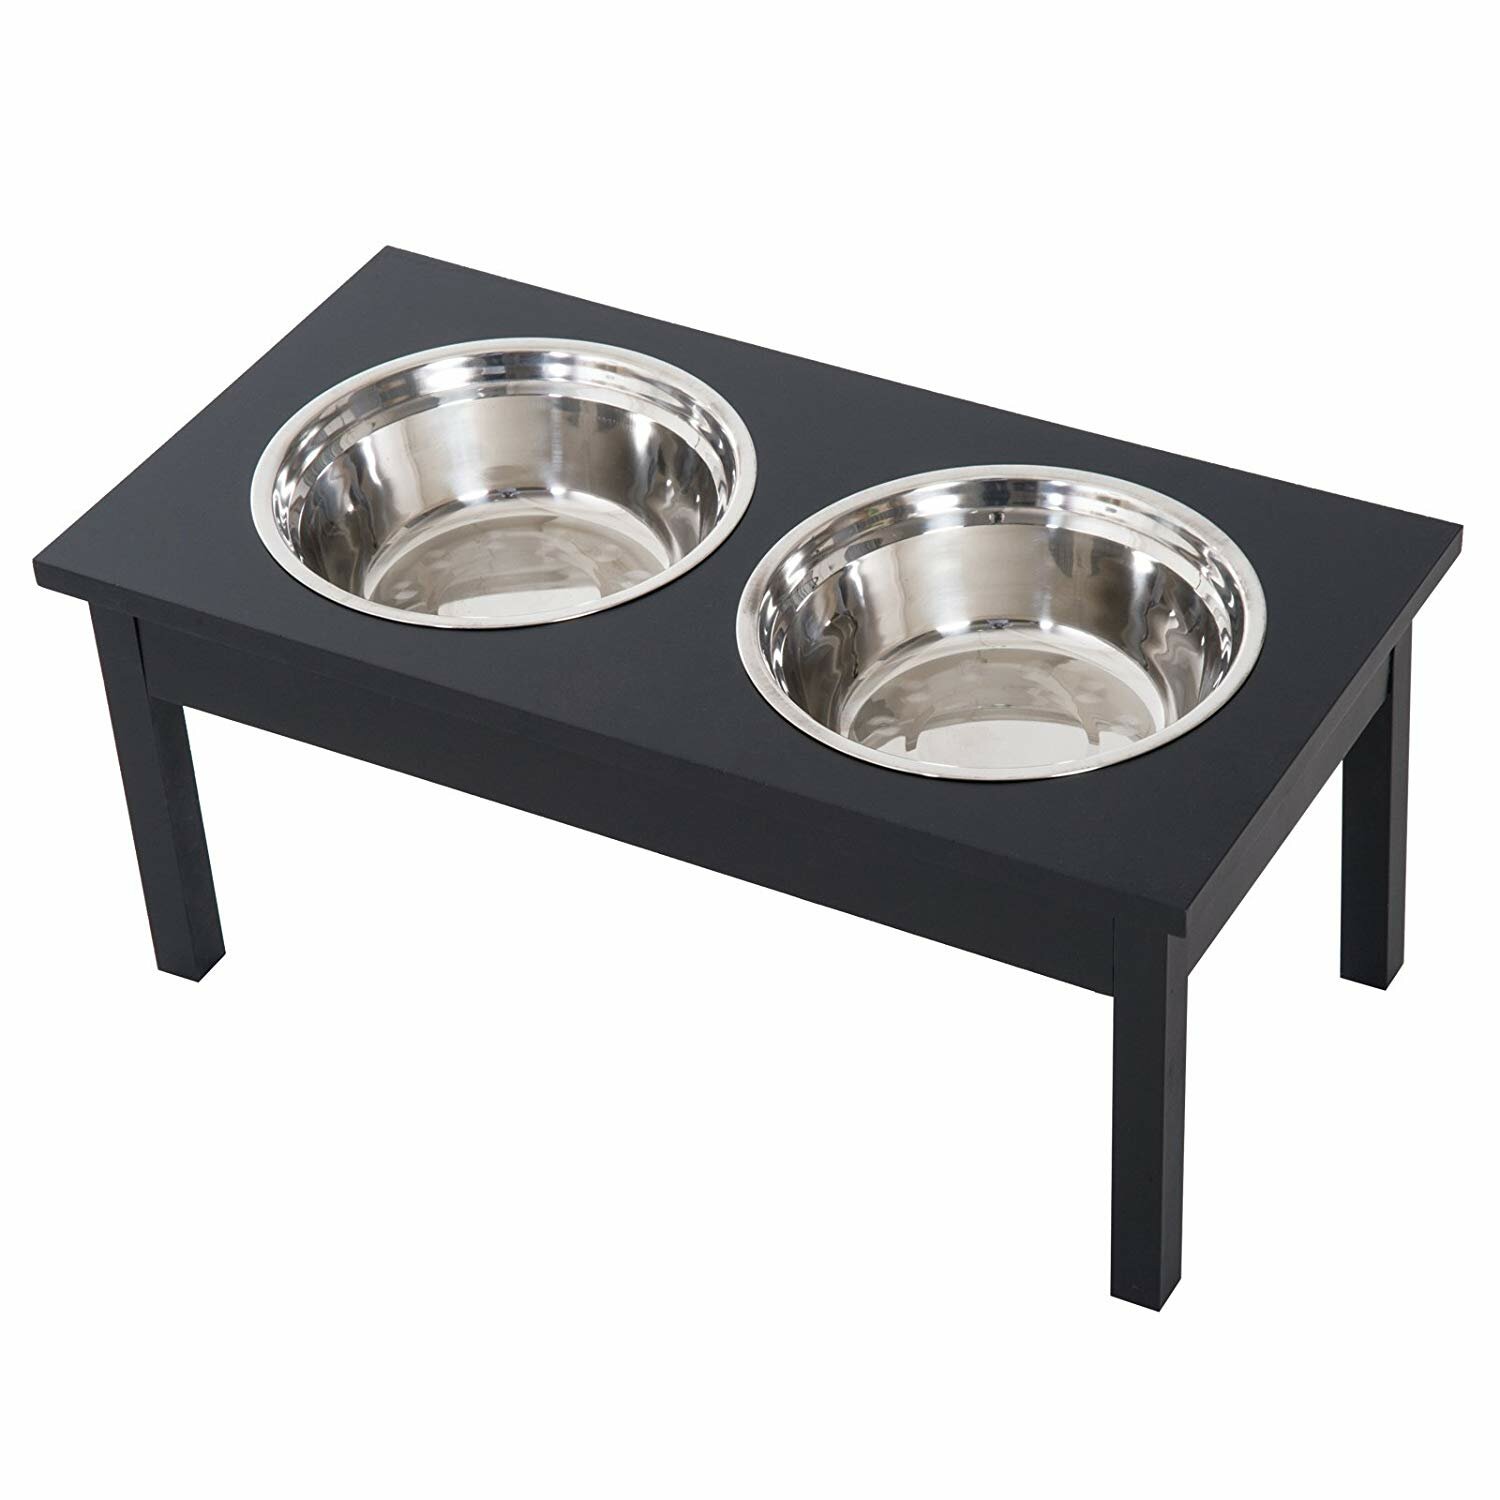 PawHut Elevated Dog Bowls with Stand for Large Dogs, Natural